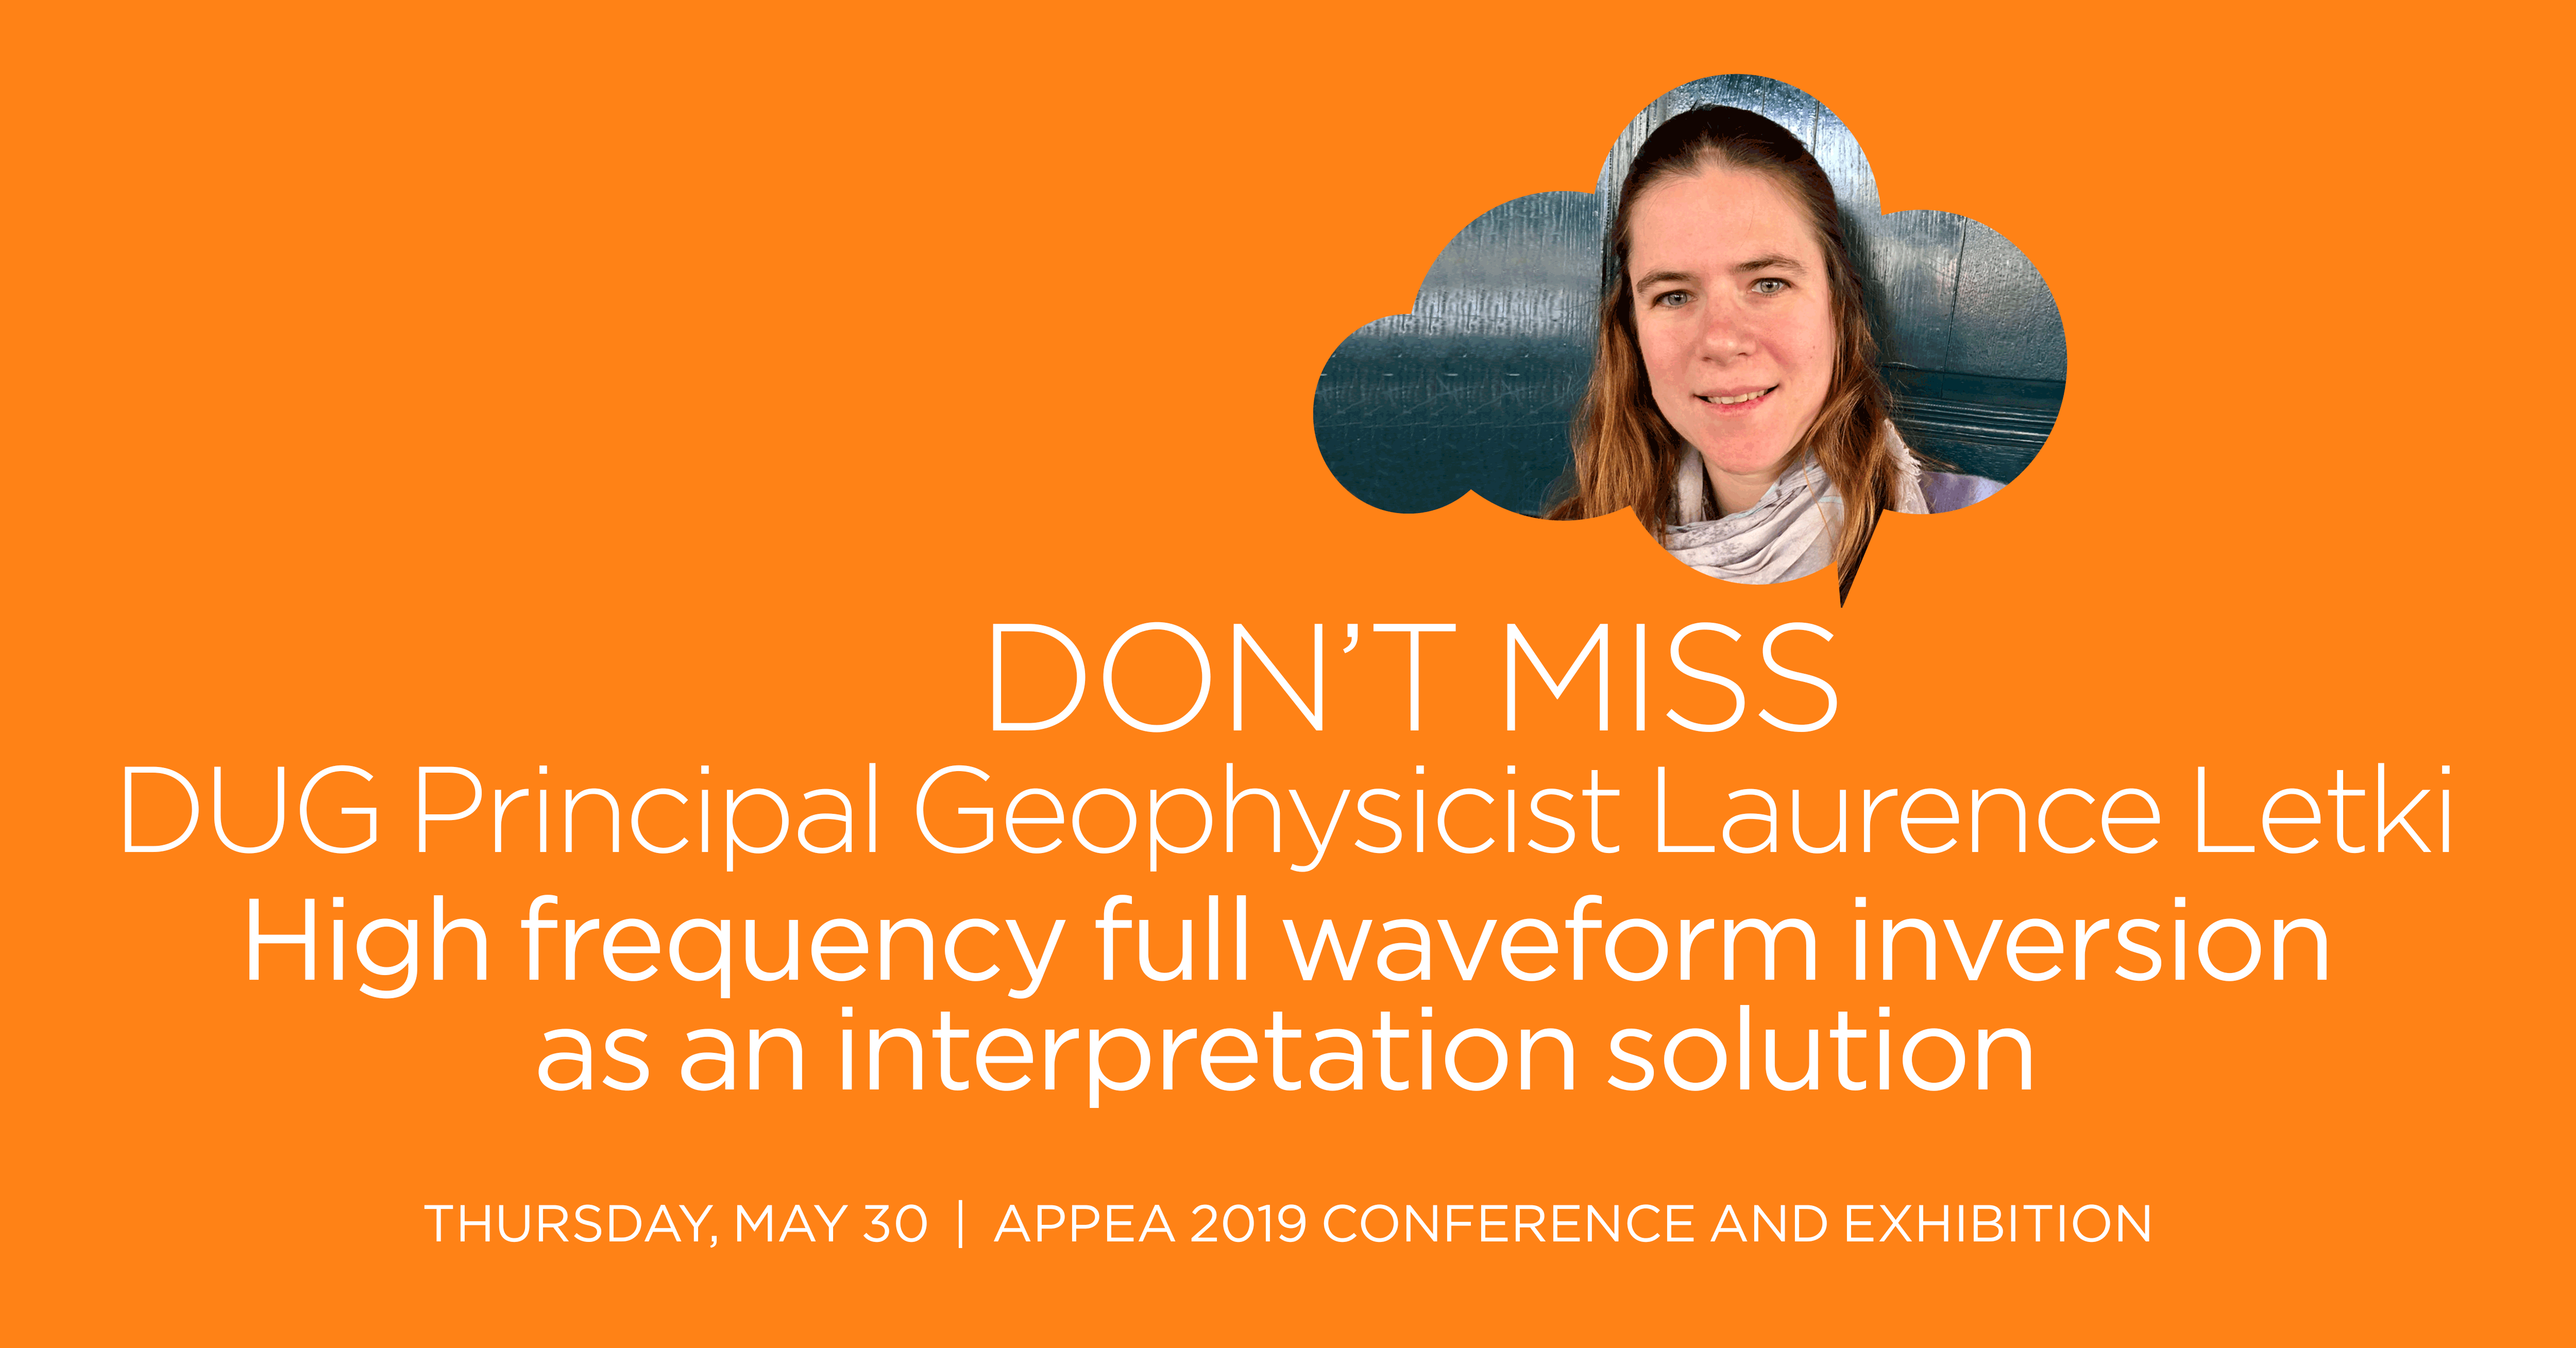 Catch an expert talk from DUG's Principal Geophysicist Laurence Letki at APPEA 2019